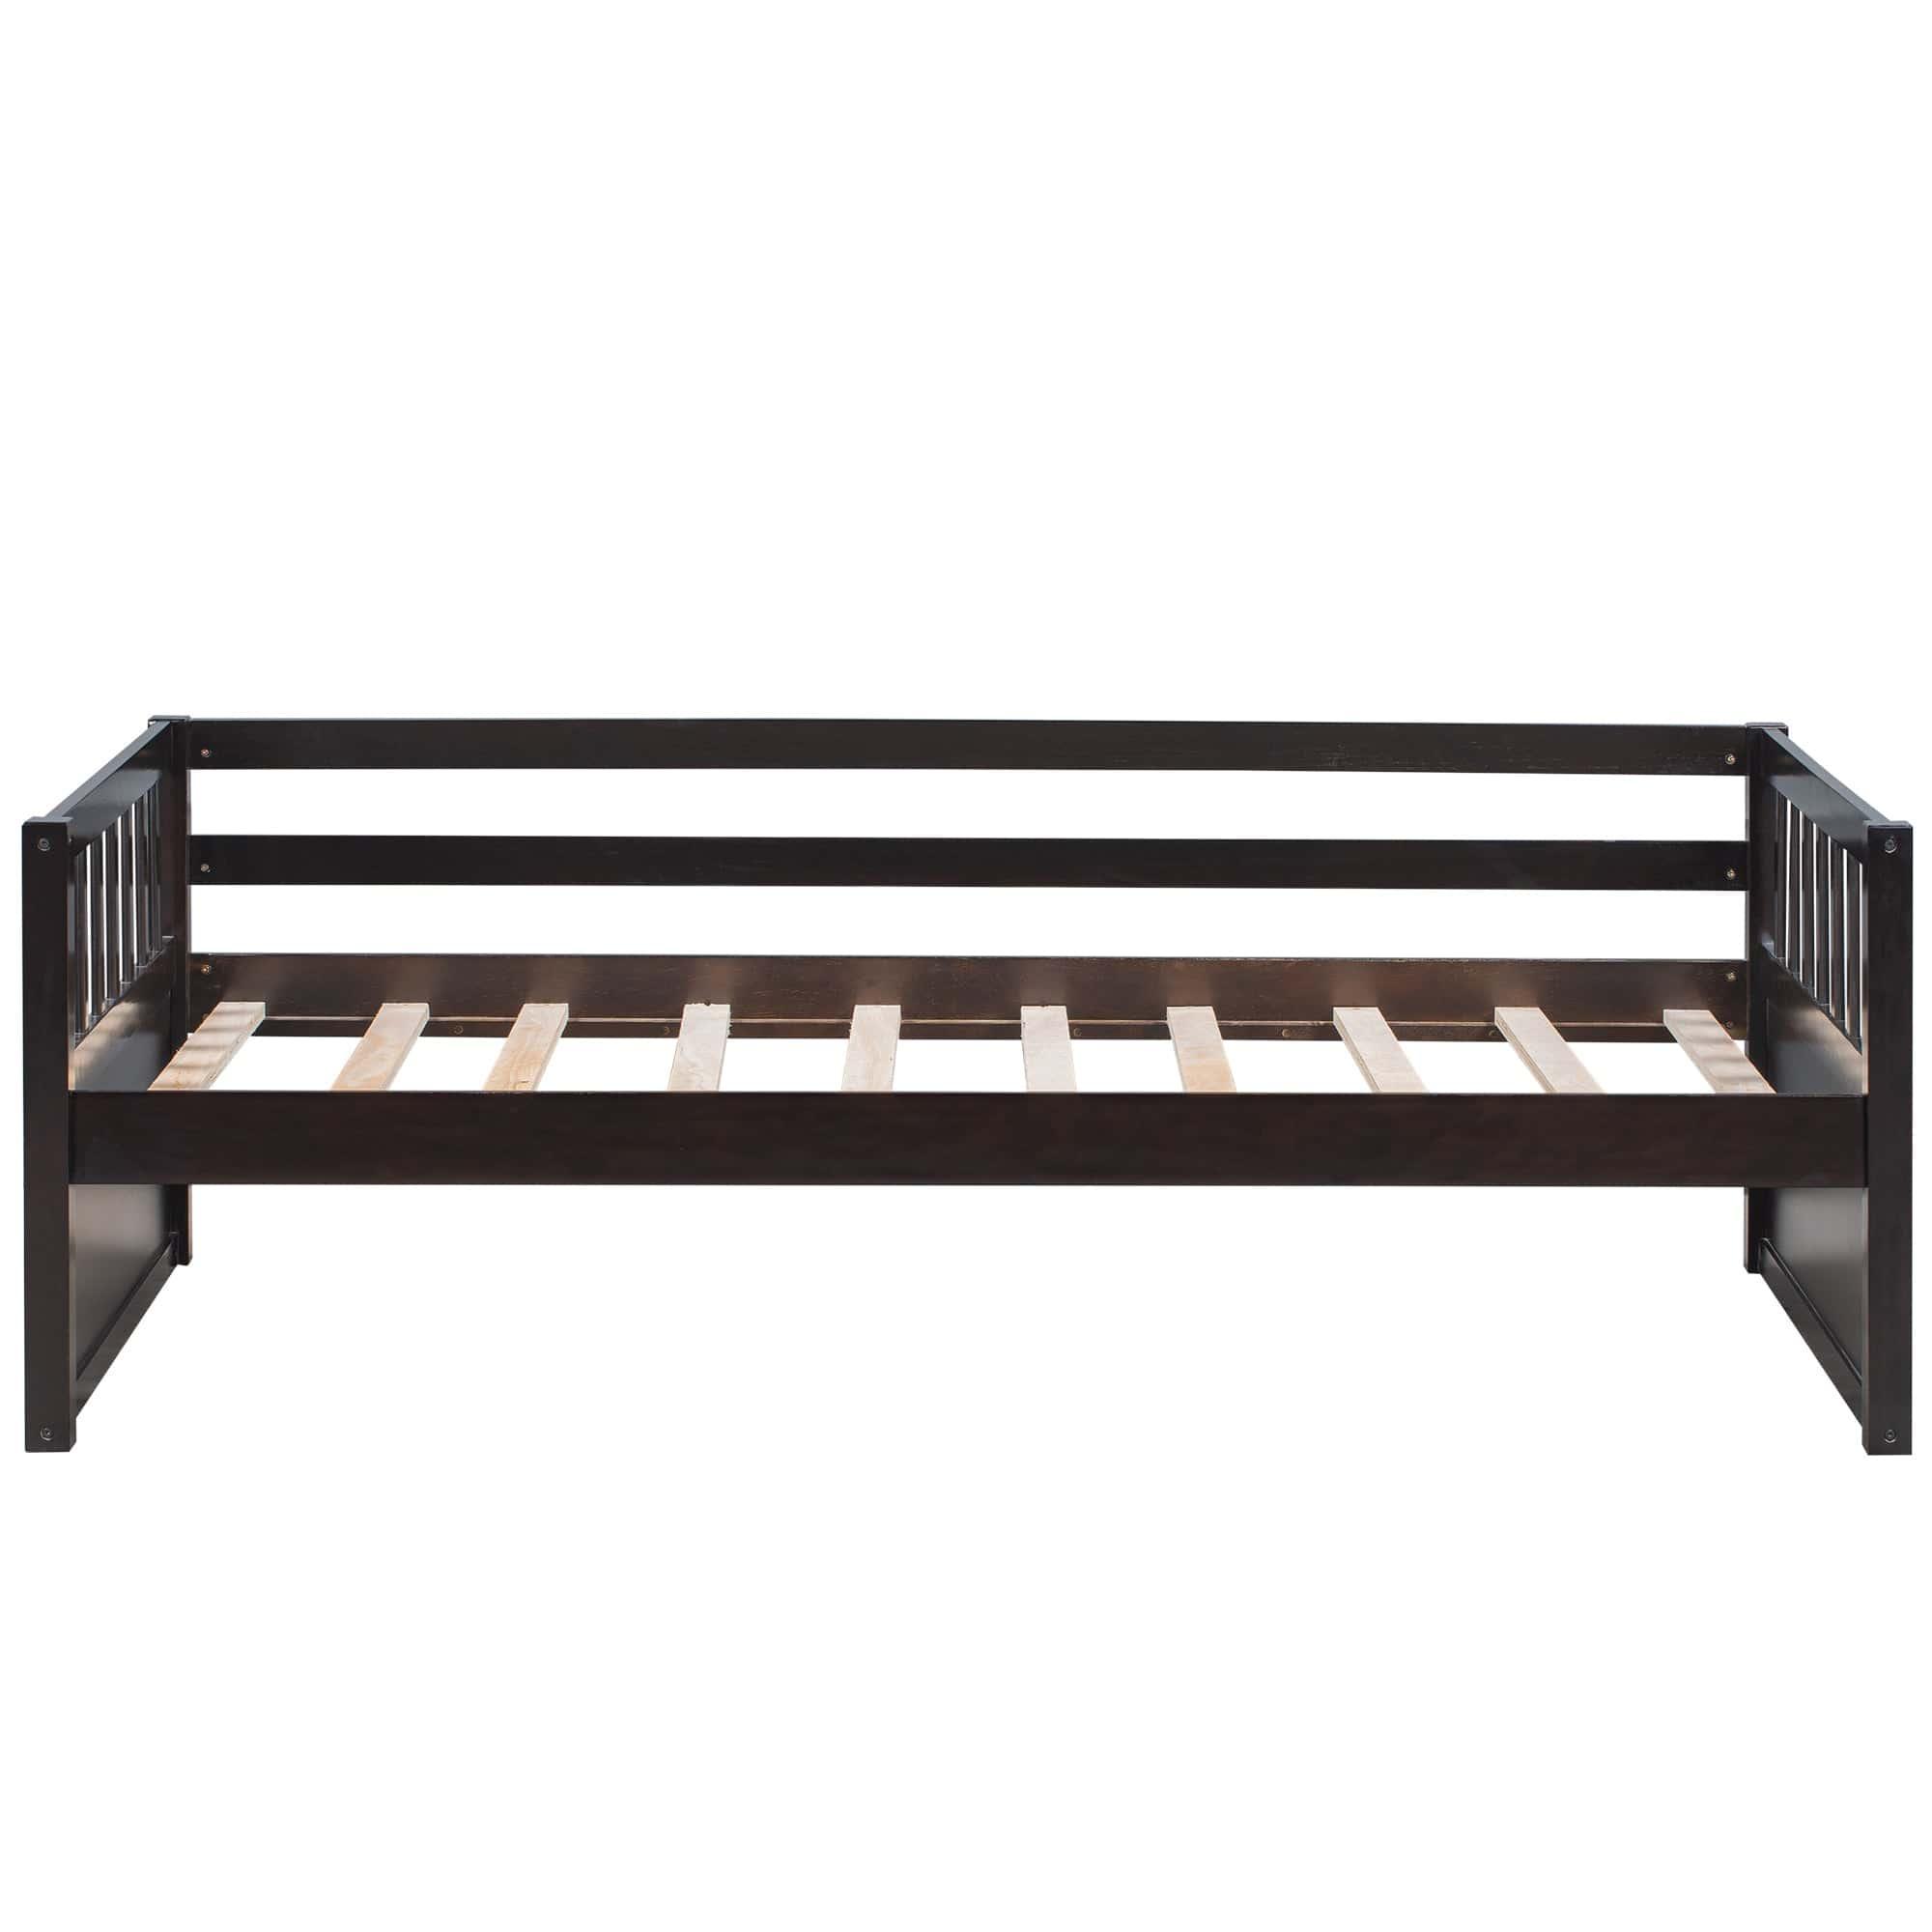 Shop Twin Size Daybed with Inseparable 2 Drawers , Espresso (New) Mademoiselle Home Decor